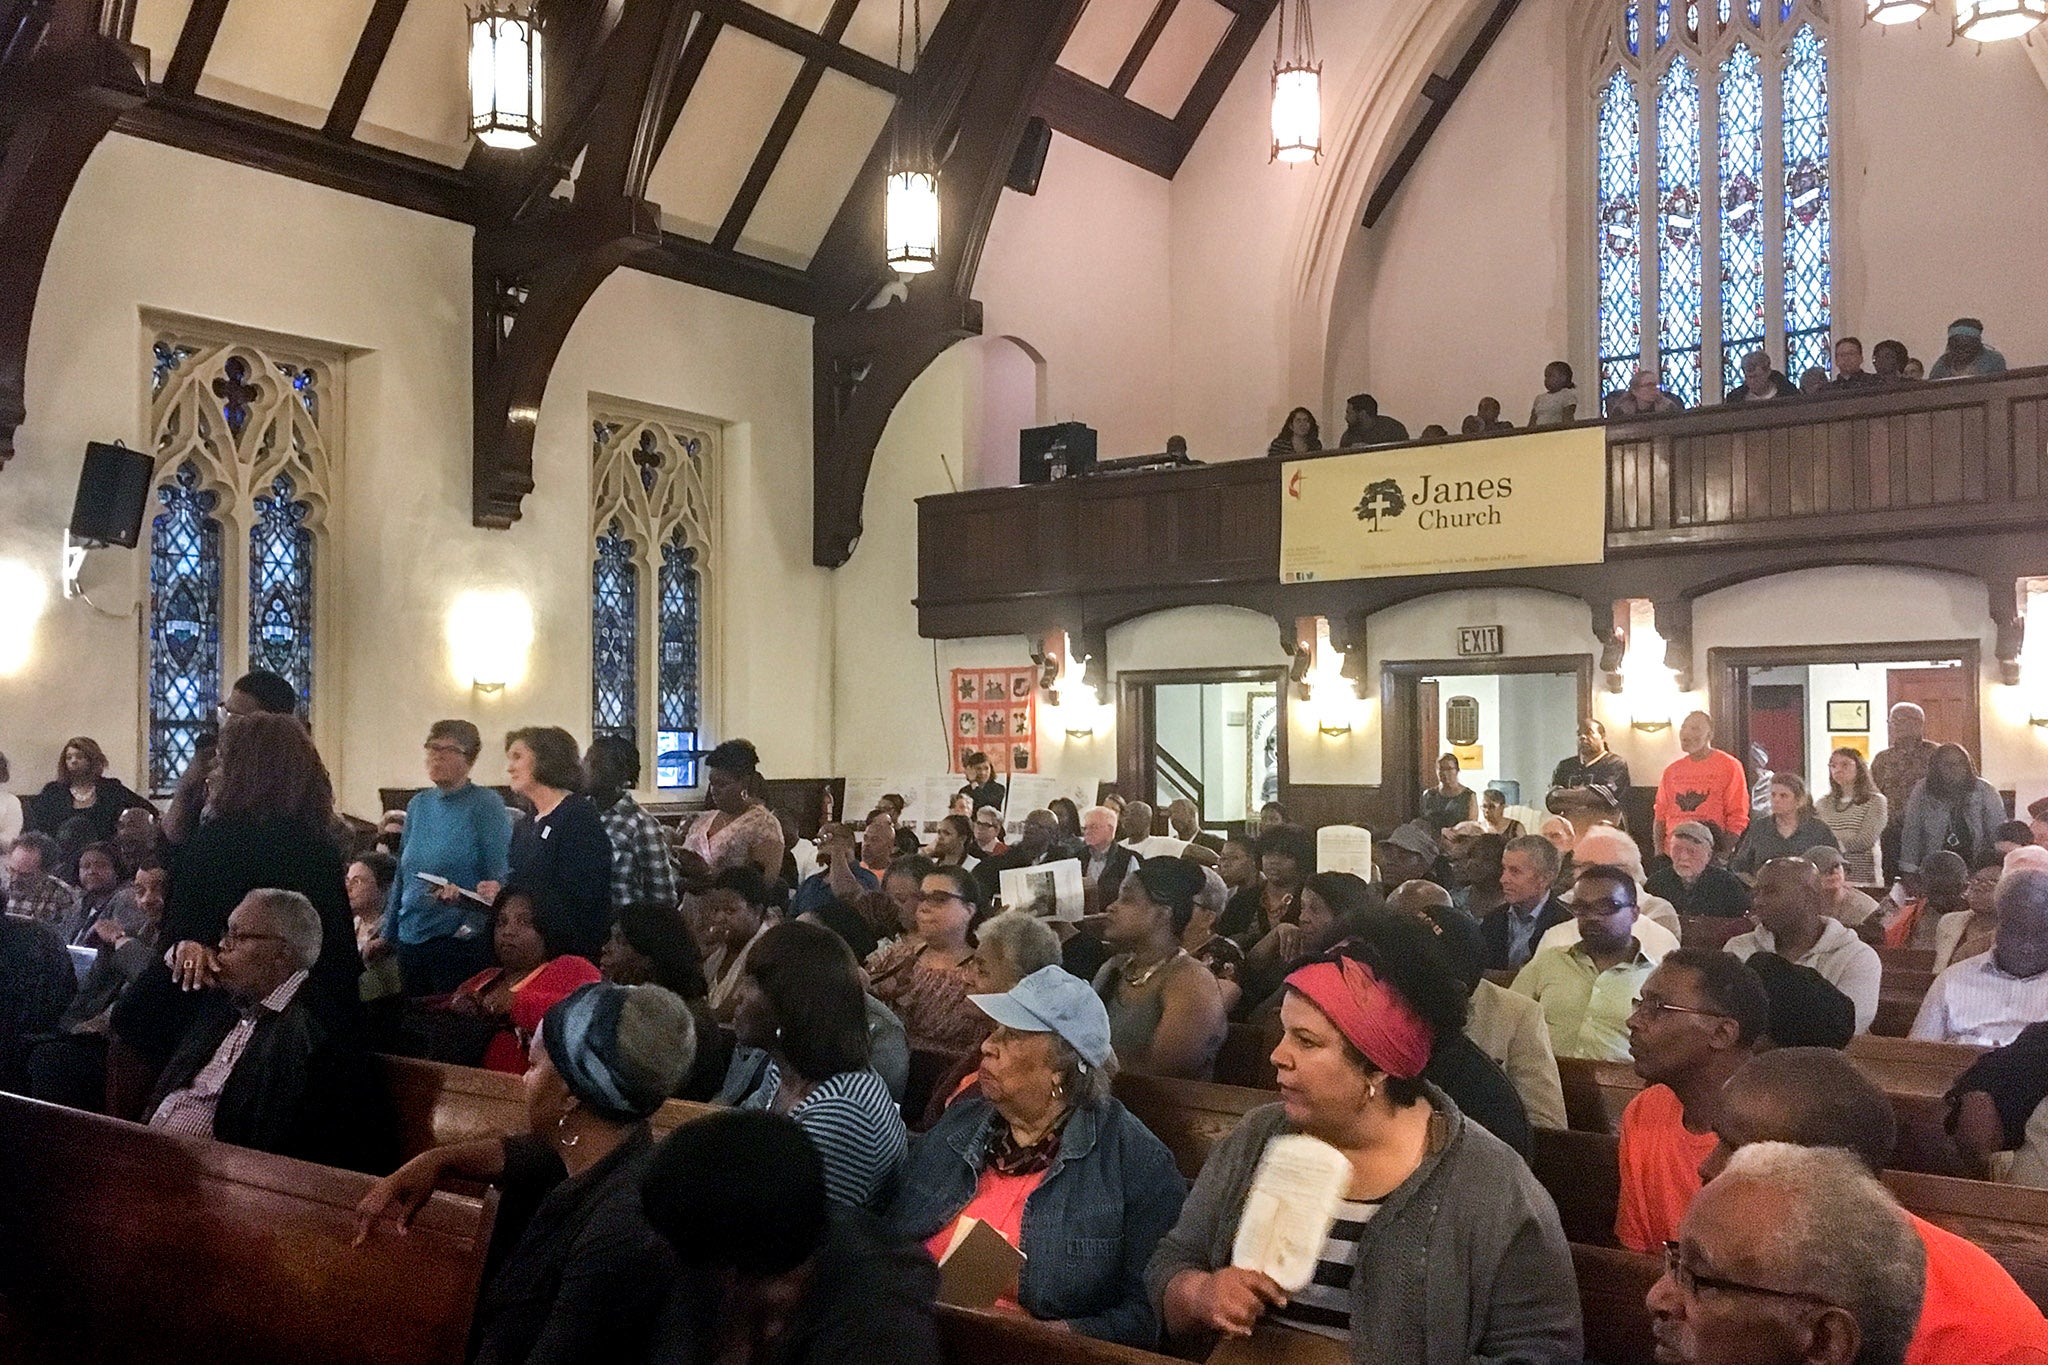 There was a full house at Janes Memorial United Methodist Church for a community meeting on the future of Germantown's old high school building. Photo by Michaela Winberg Billy Penn